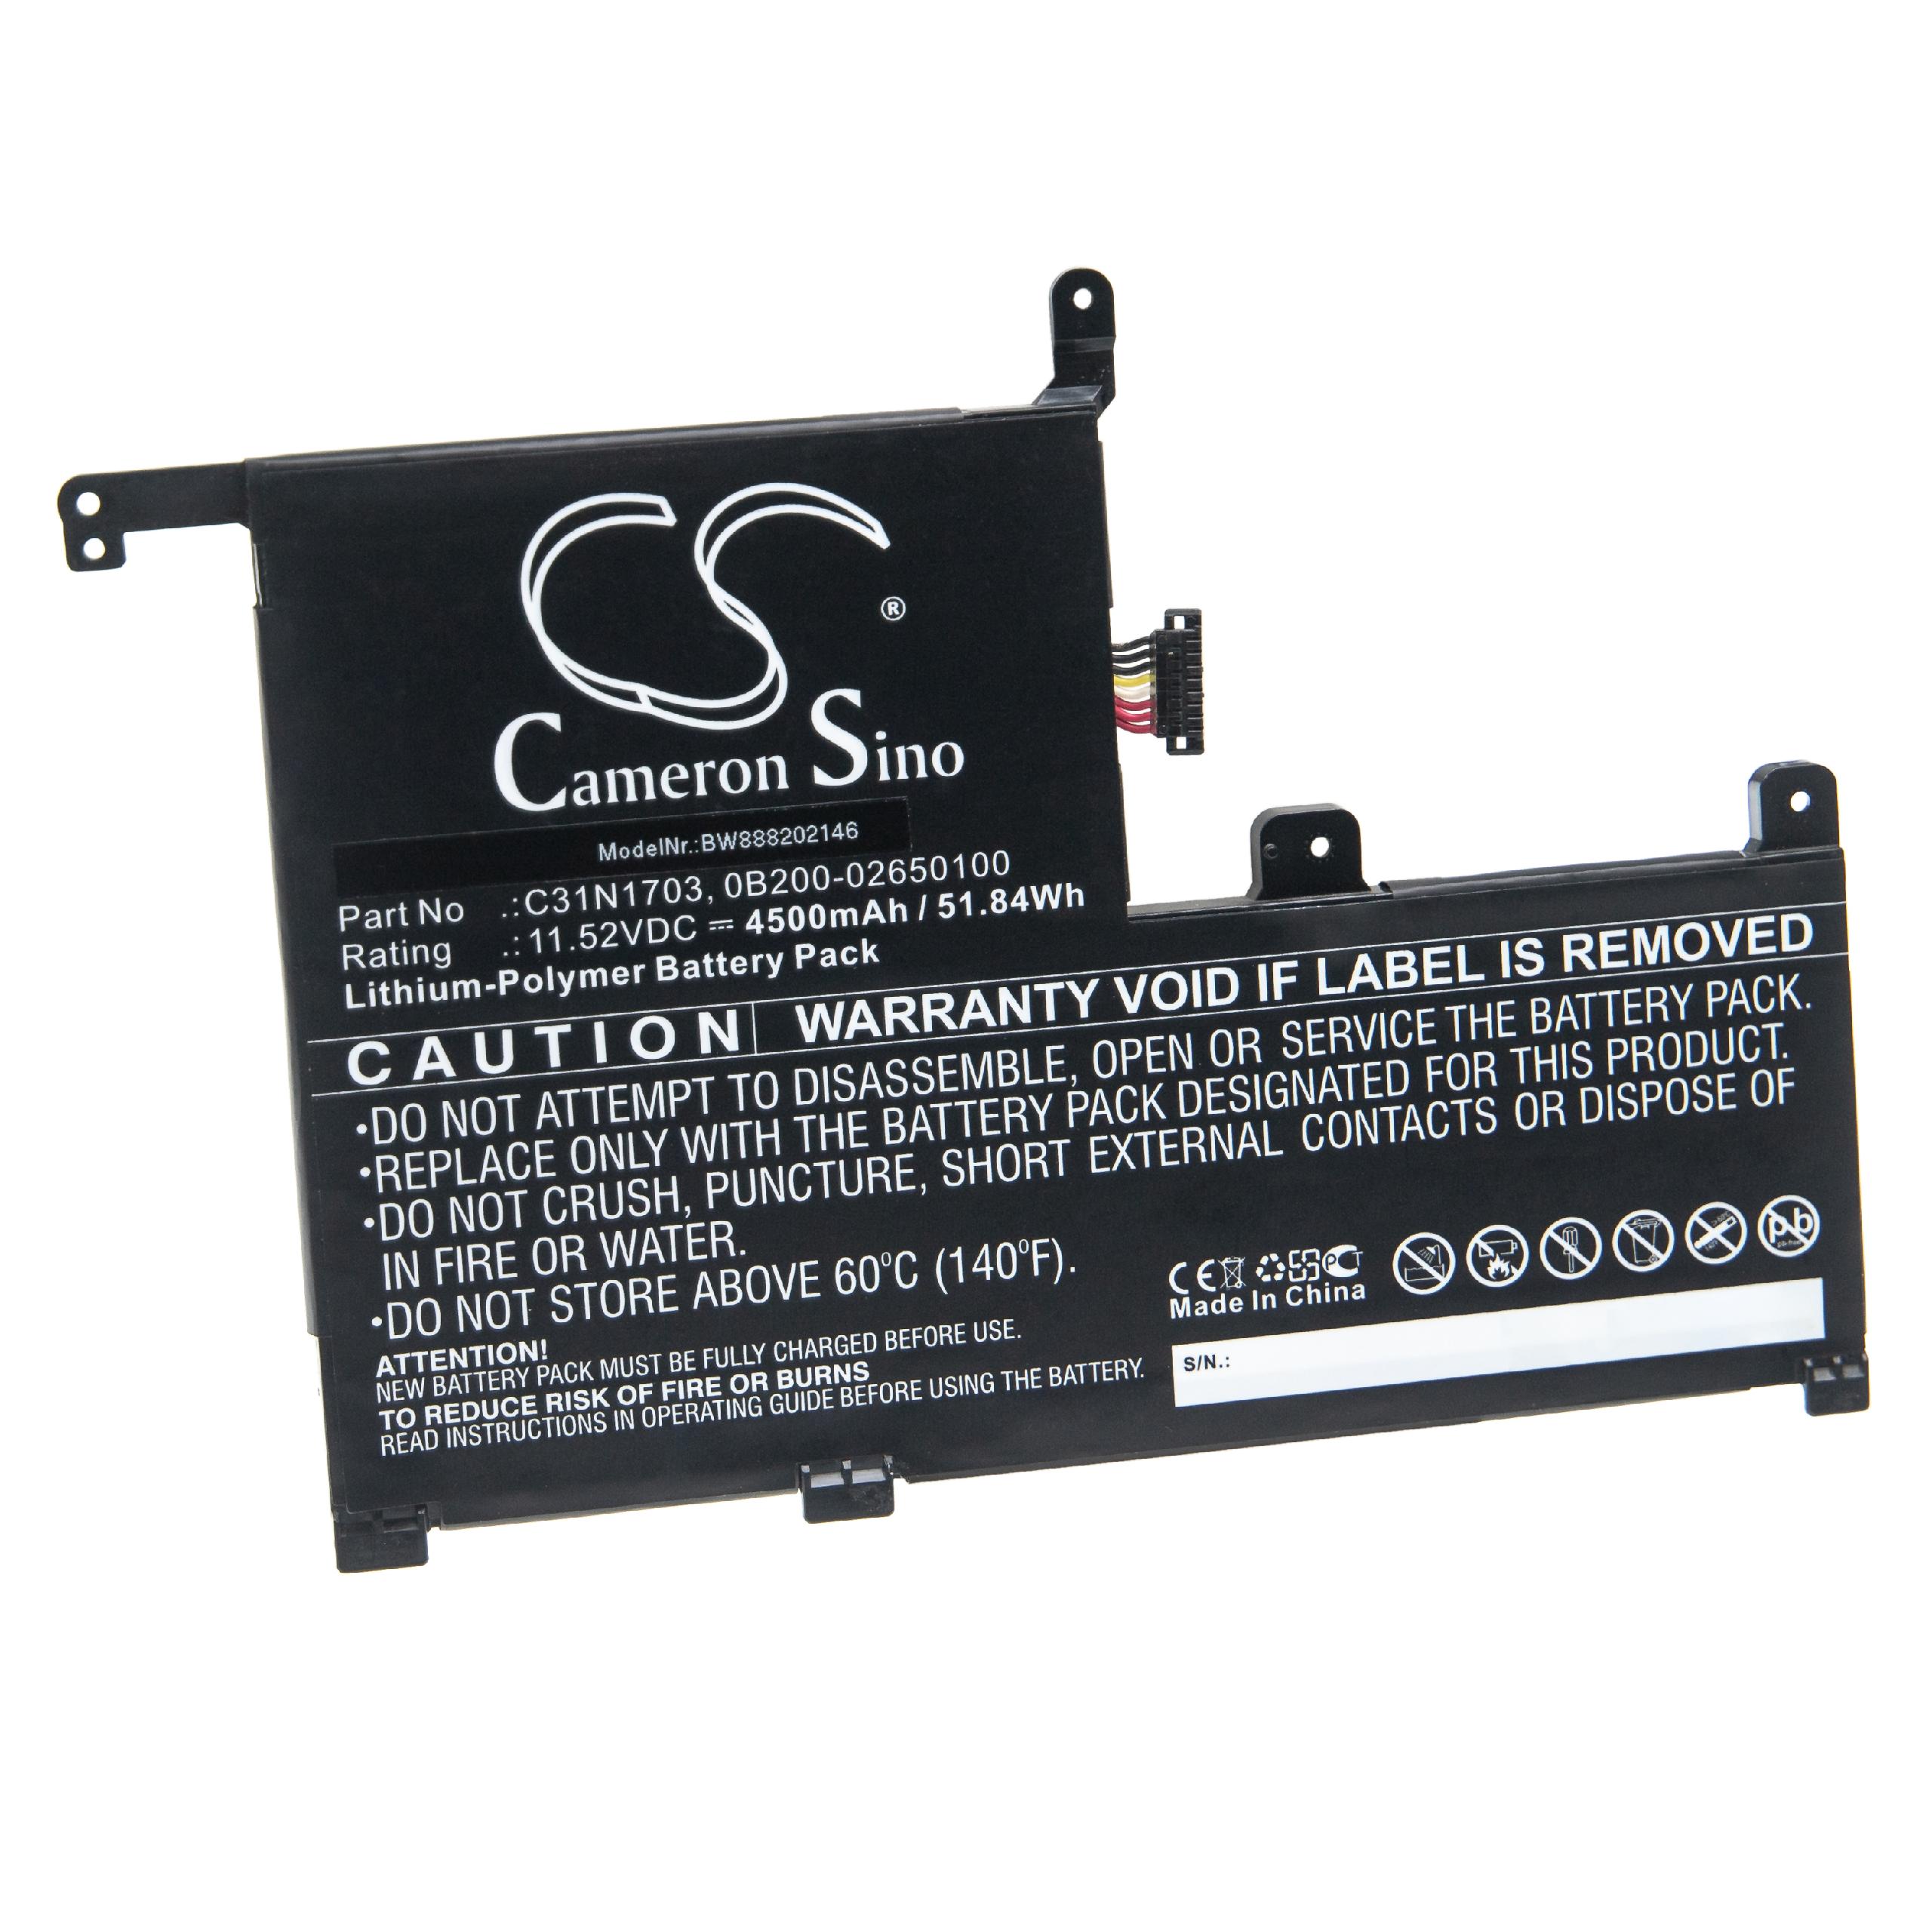 Notebook Battery Replacement for Asus C31N1703, 0B200-02650100 - 4500mAh 11.52V Li-polymer